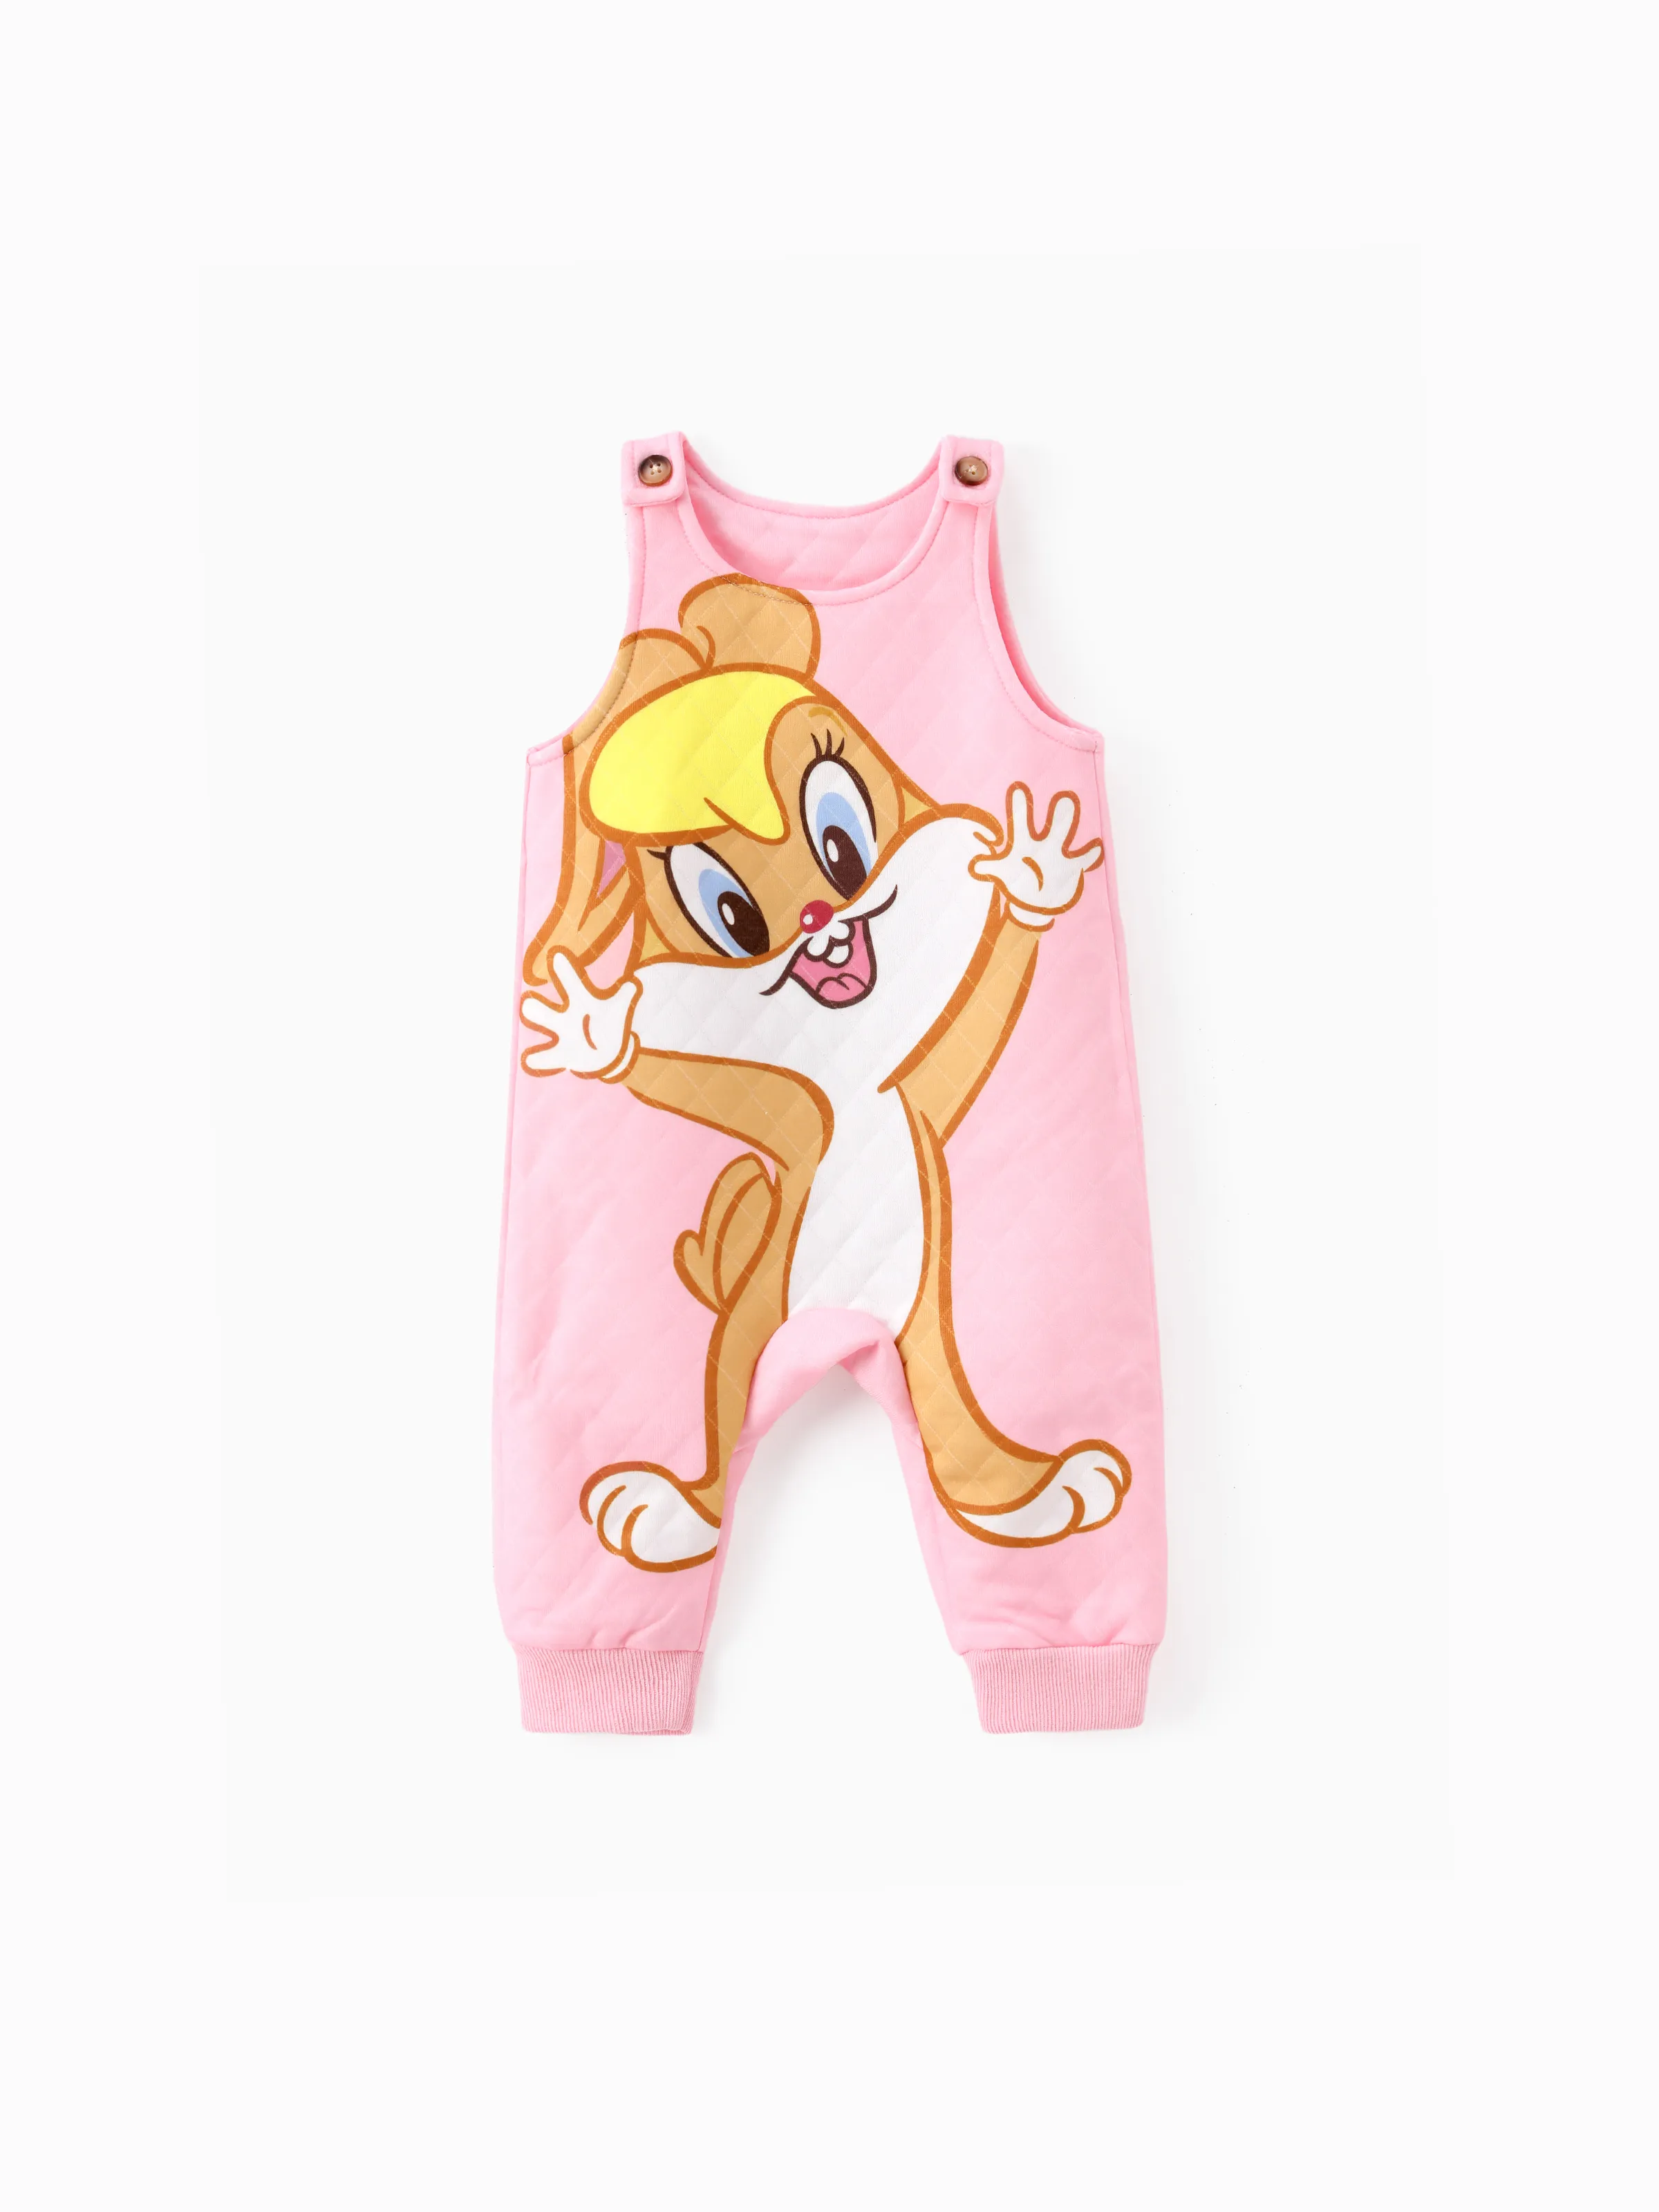 

Looney Tunes Baby Boy/Girl Character Graphic Print Top or Jumpsuit